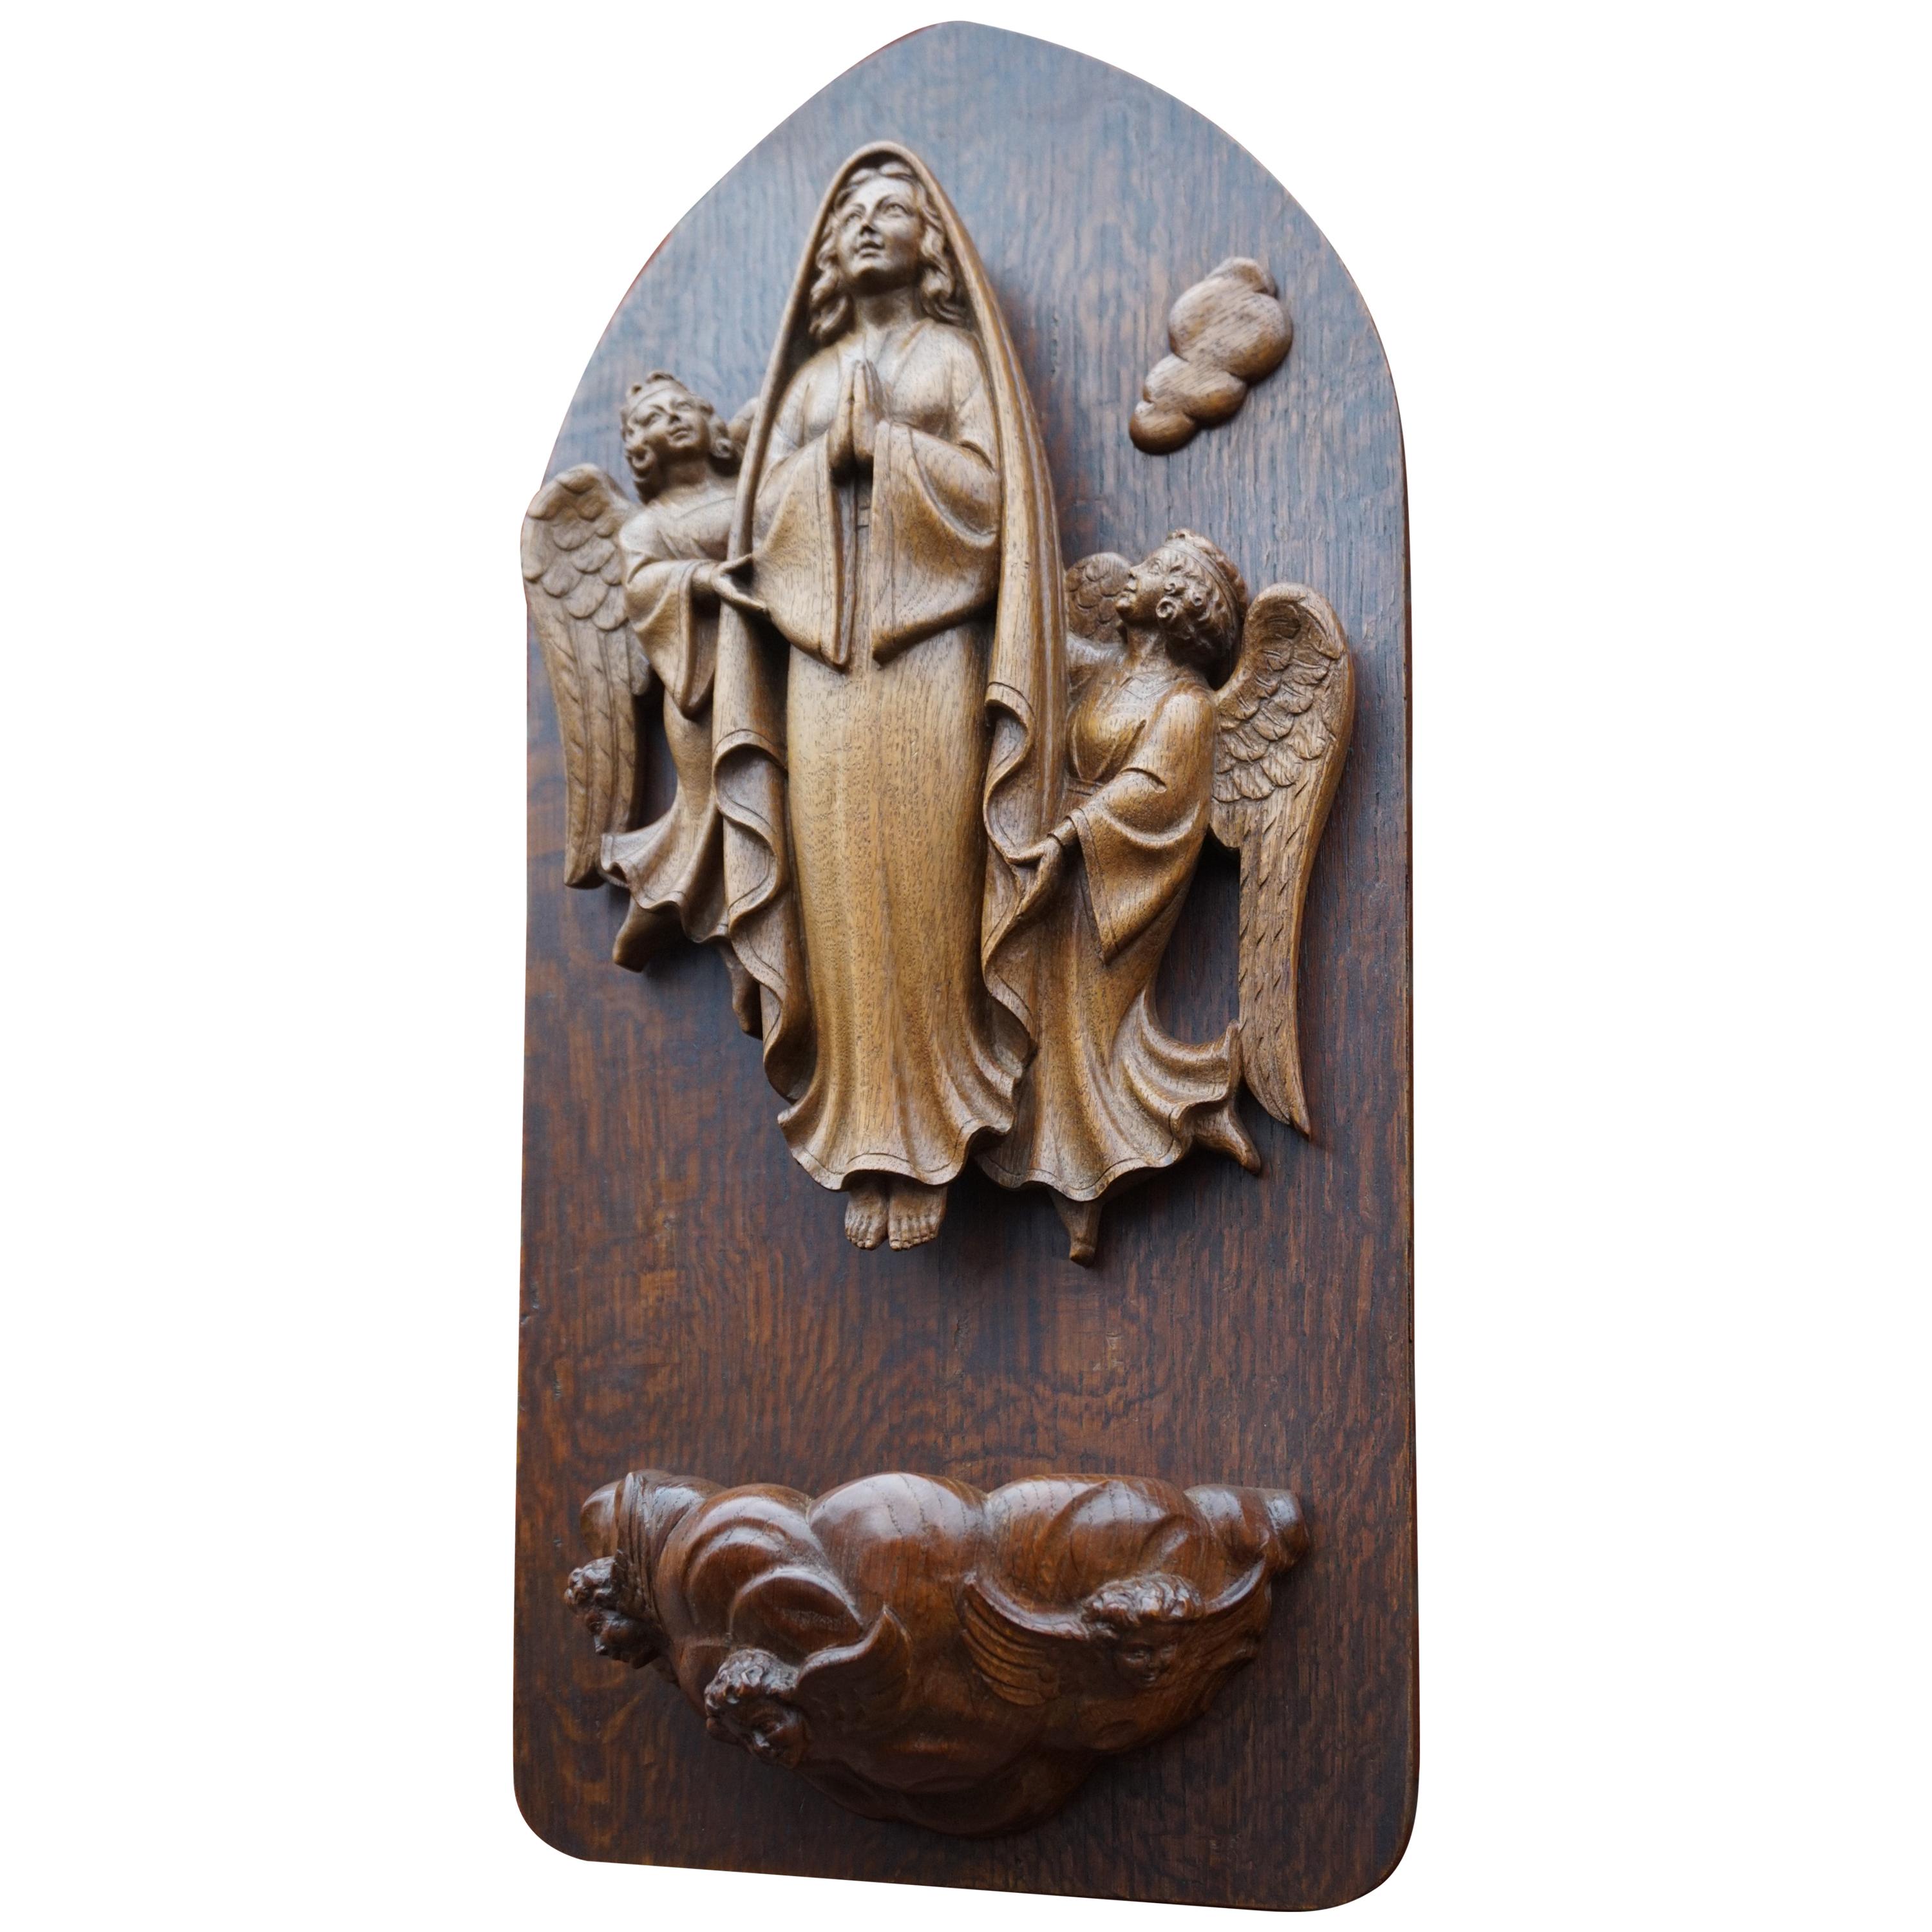 Hand Carved Antique Wall Plaque Sculpture of The Assumption of Mary with Angels